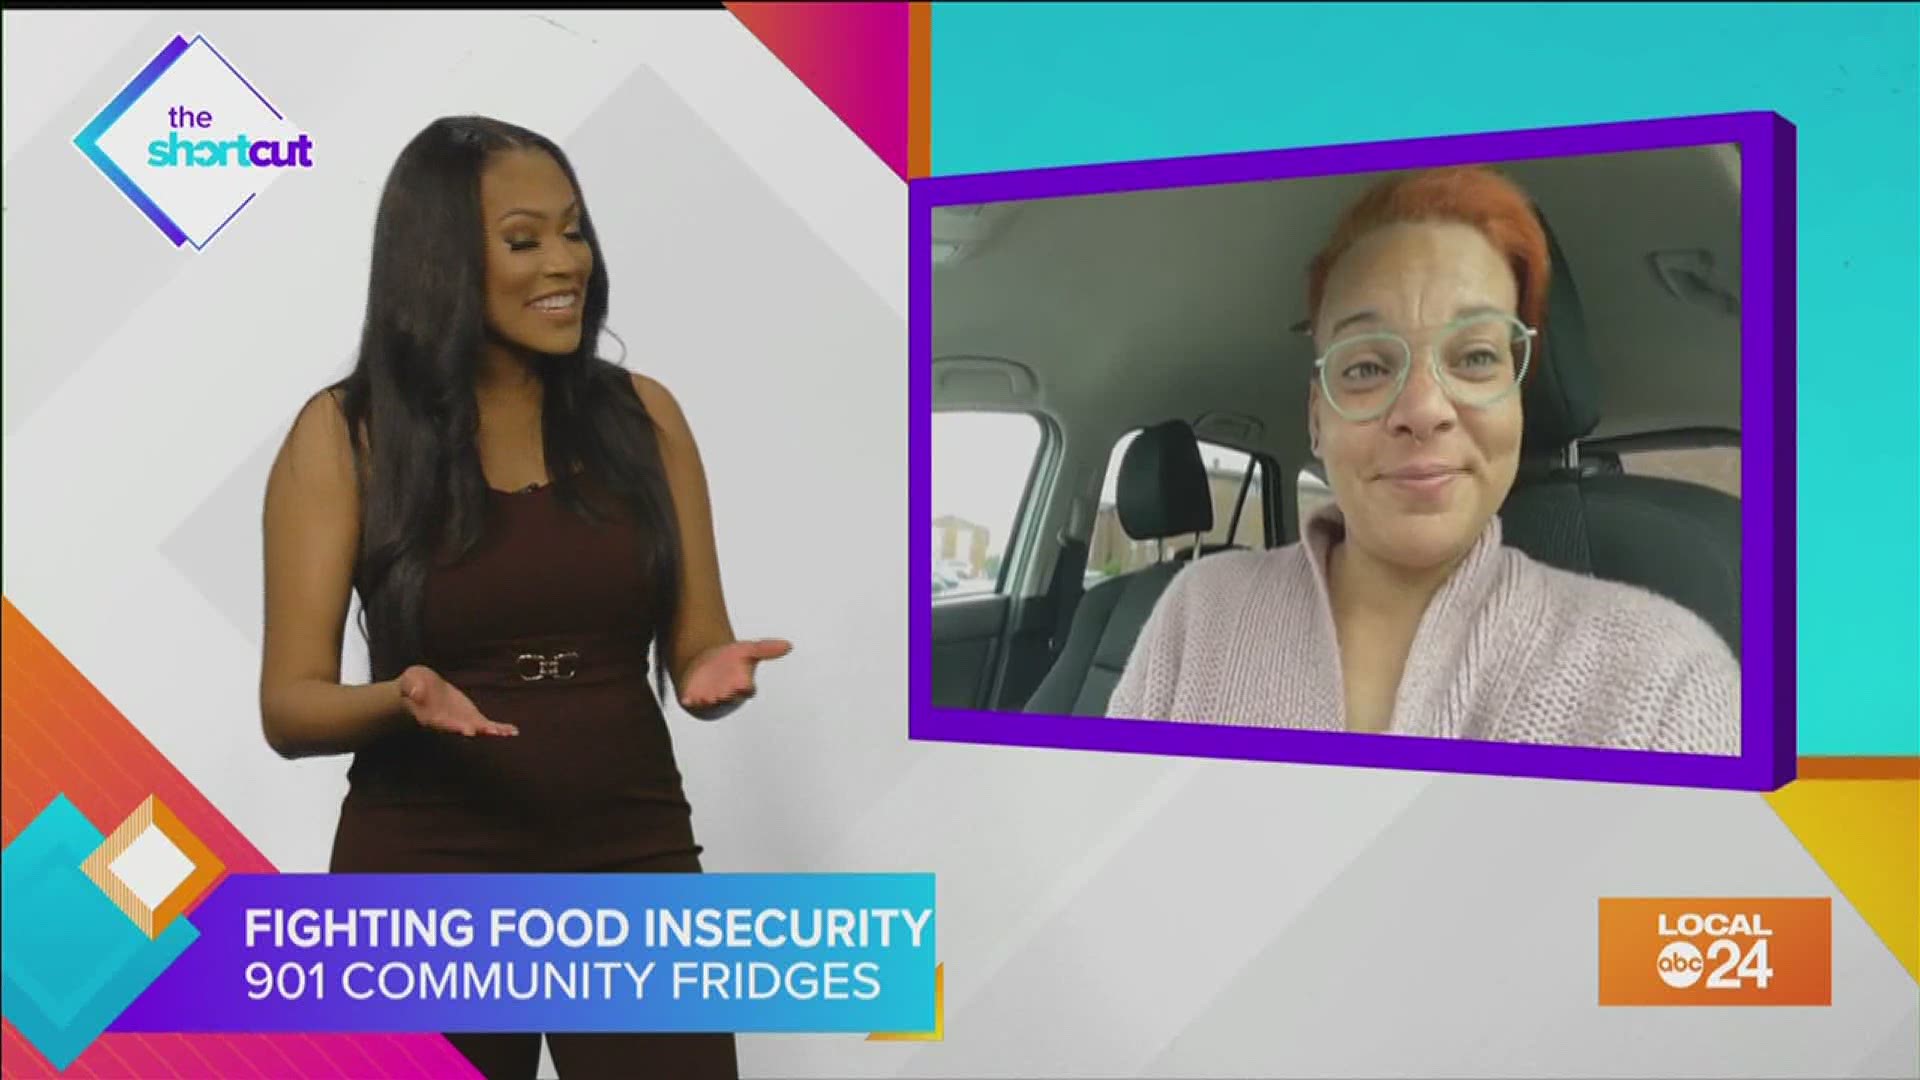 Join host Sydney Neely with guest star LJ Abraham as we take a look at one organization that's fighting food insecurity all across the Memphis area! :D